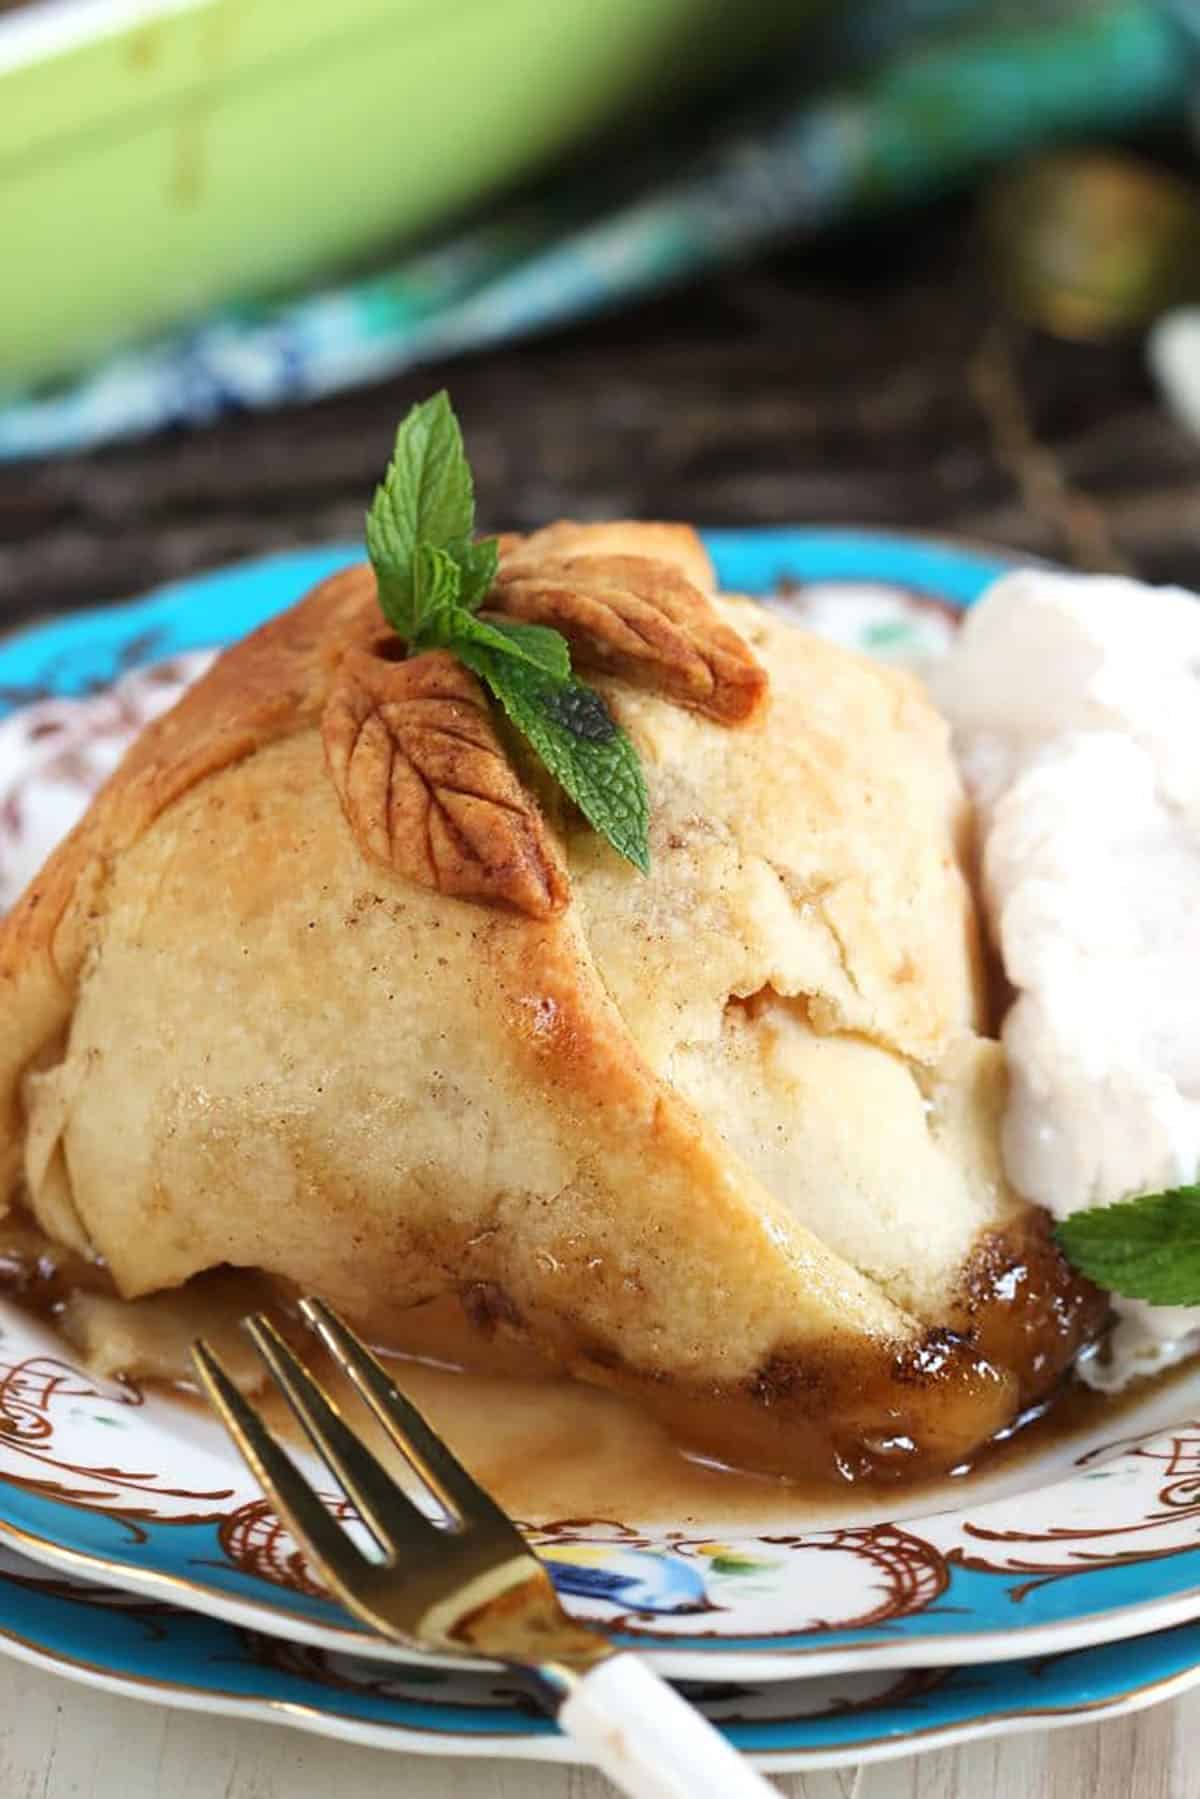 Apple dumpling topped with a sprig of mint on a blue and white plate with whipped cream and a gold fork with a white handle.